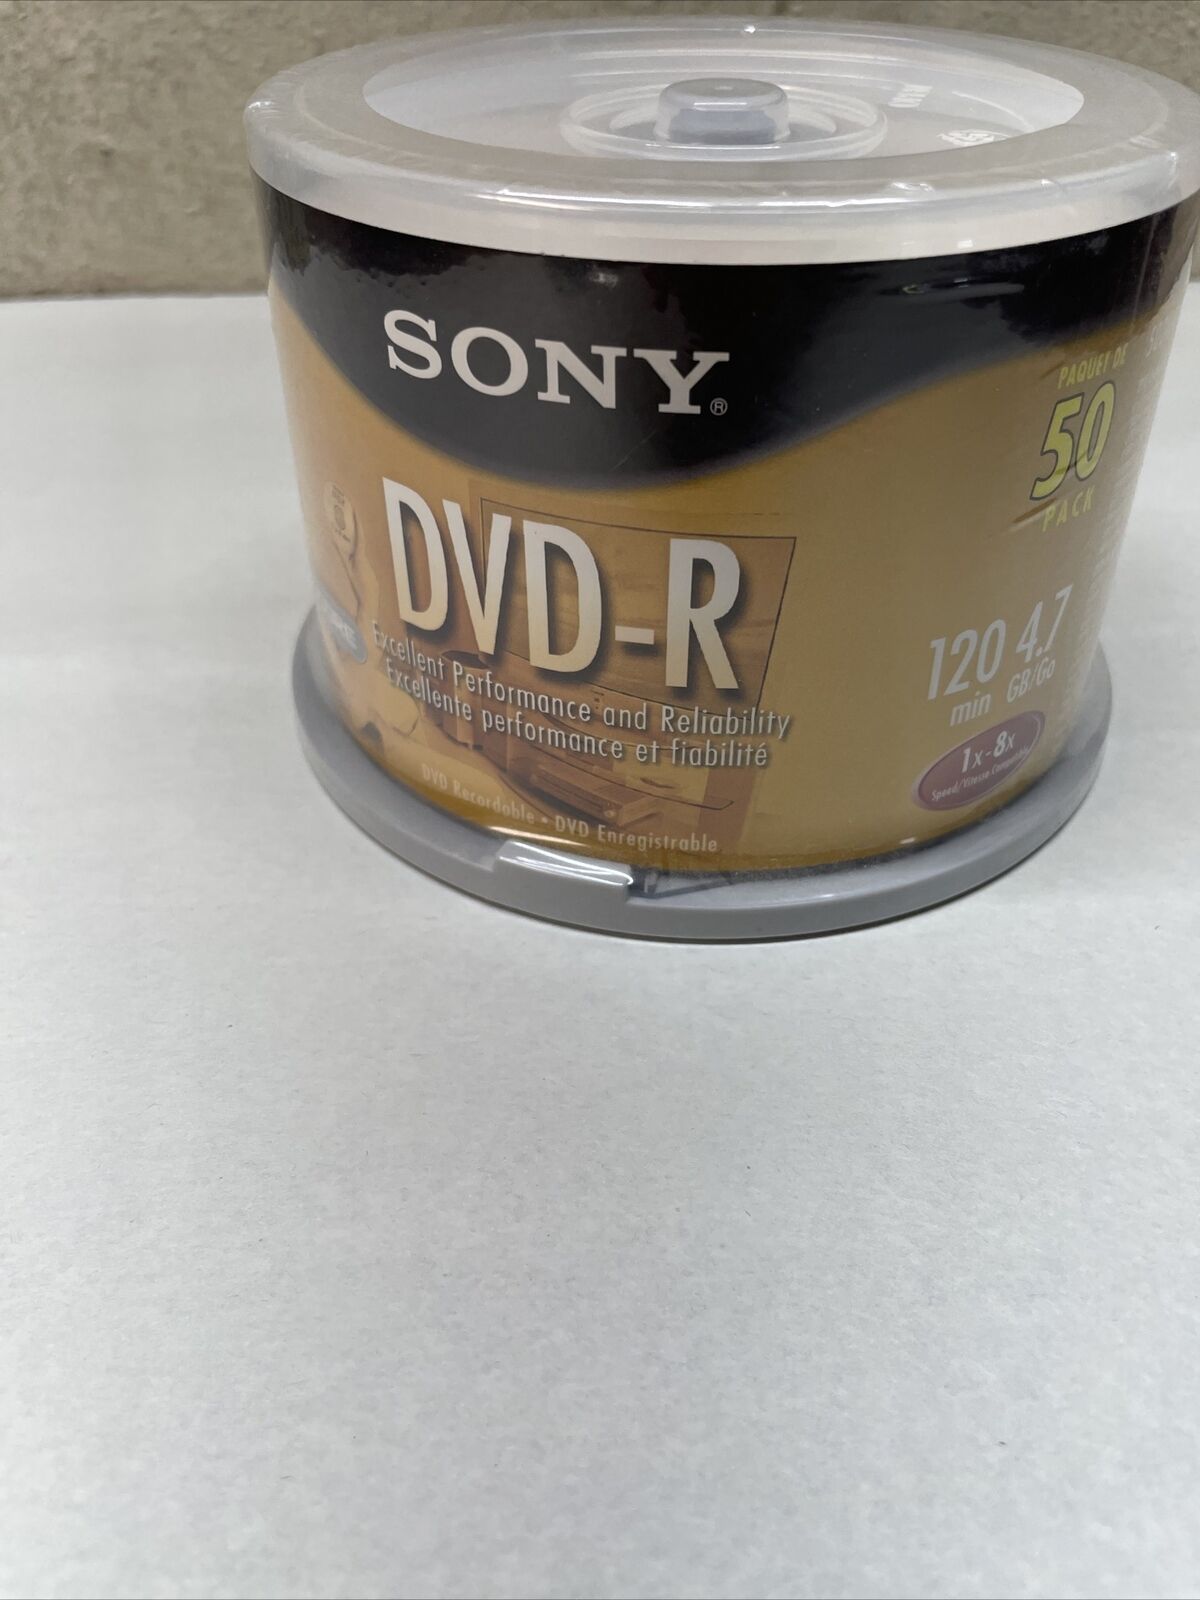 SONY DVD-R 50 Pack 4.7 GB 120 Min Blank Media Disc NEW / SEALED Fast Shipping#A7